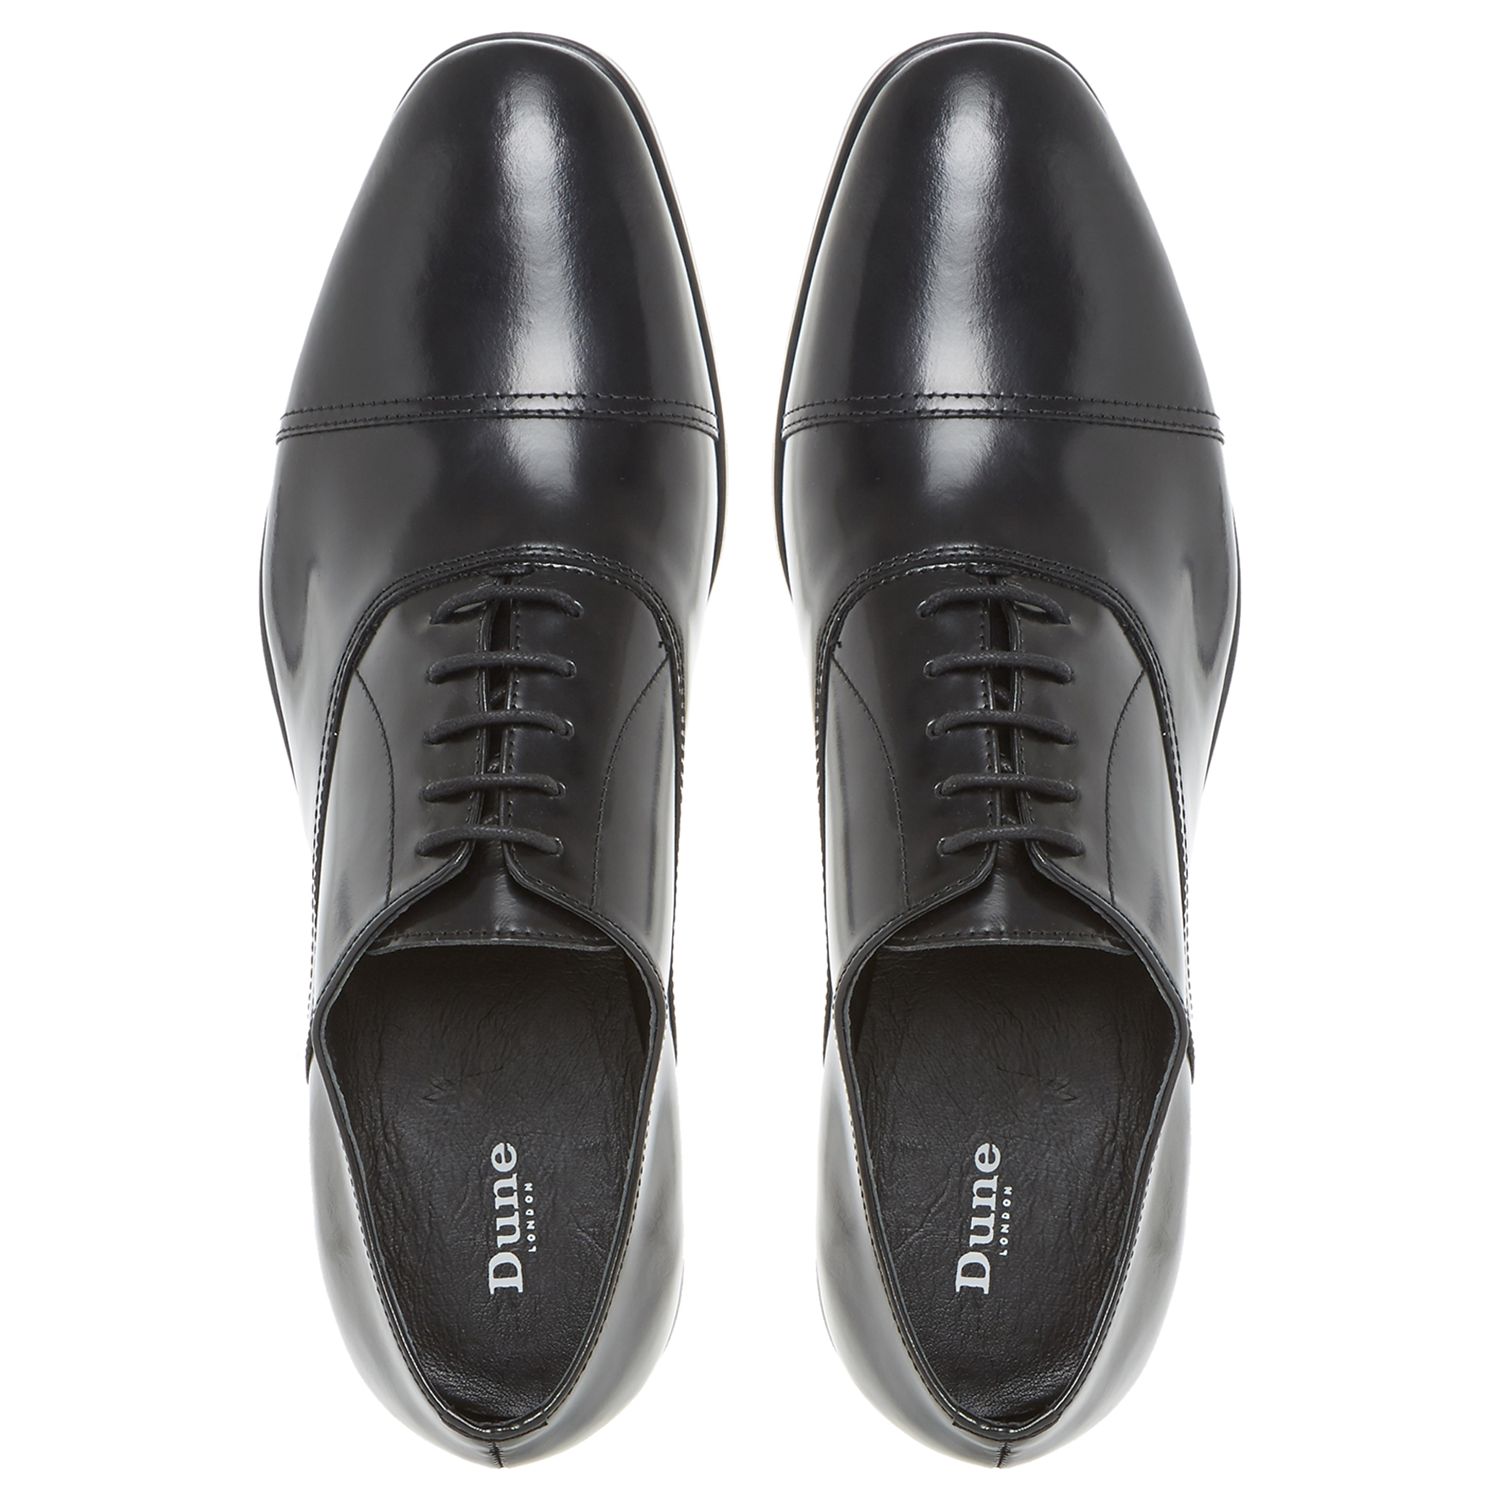 Dune Pall Mall Oxford Shoes, Black